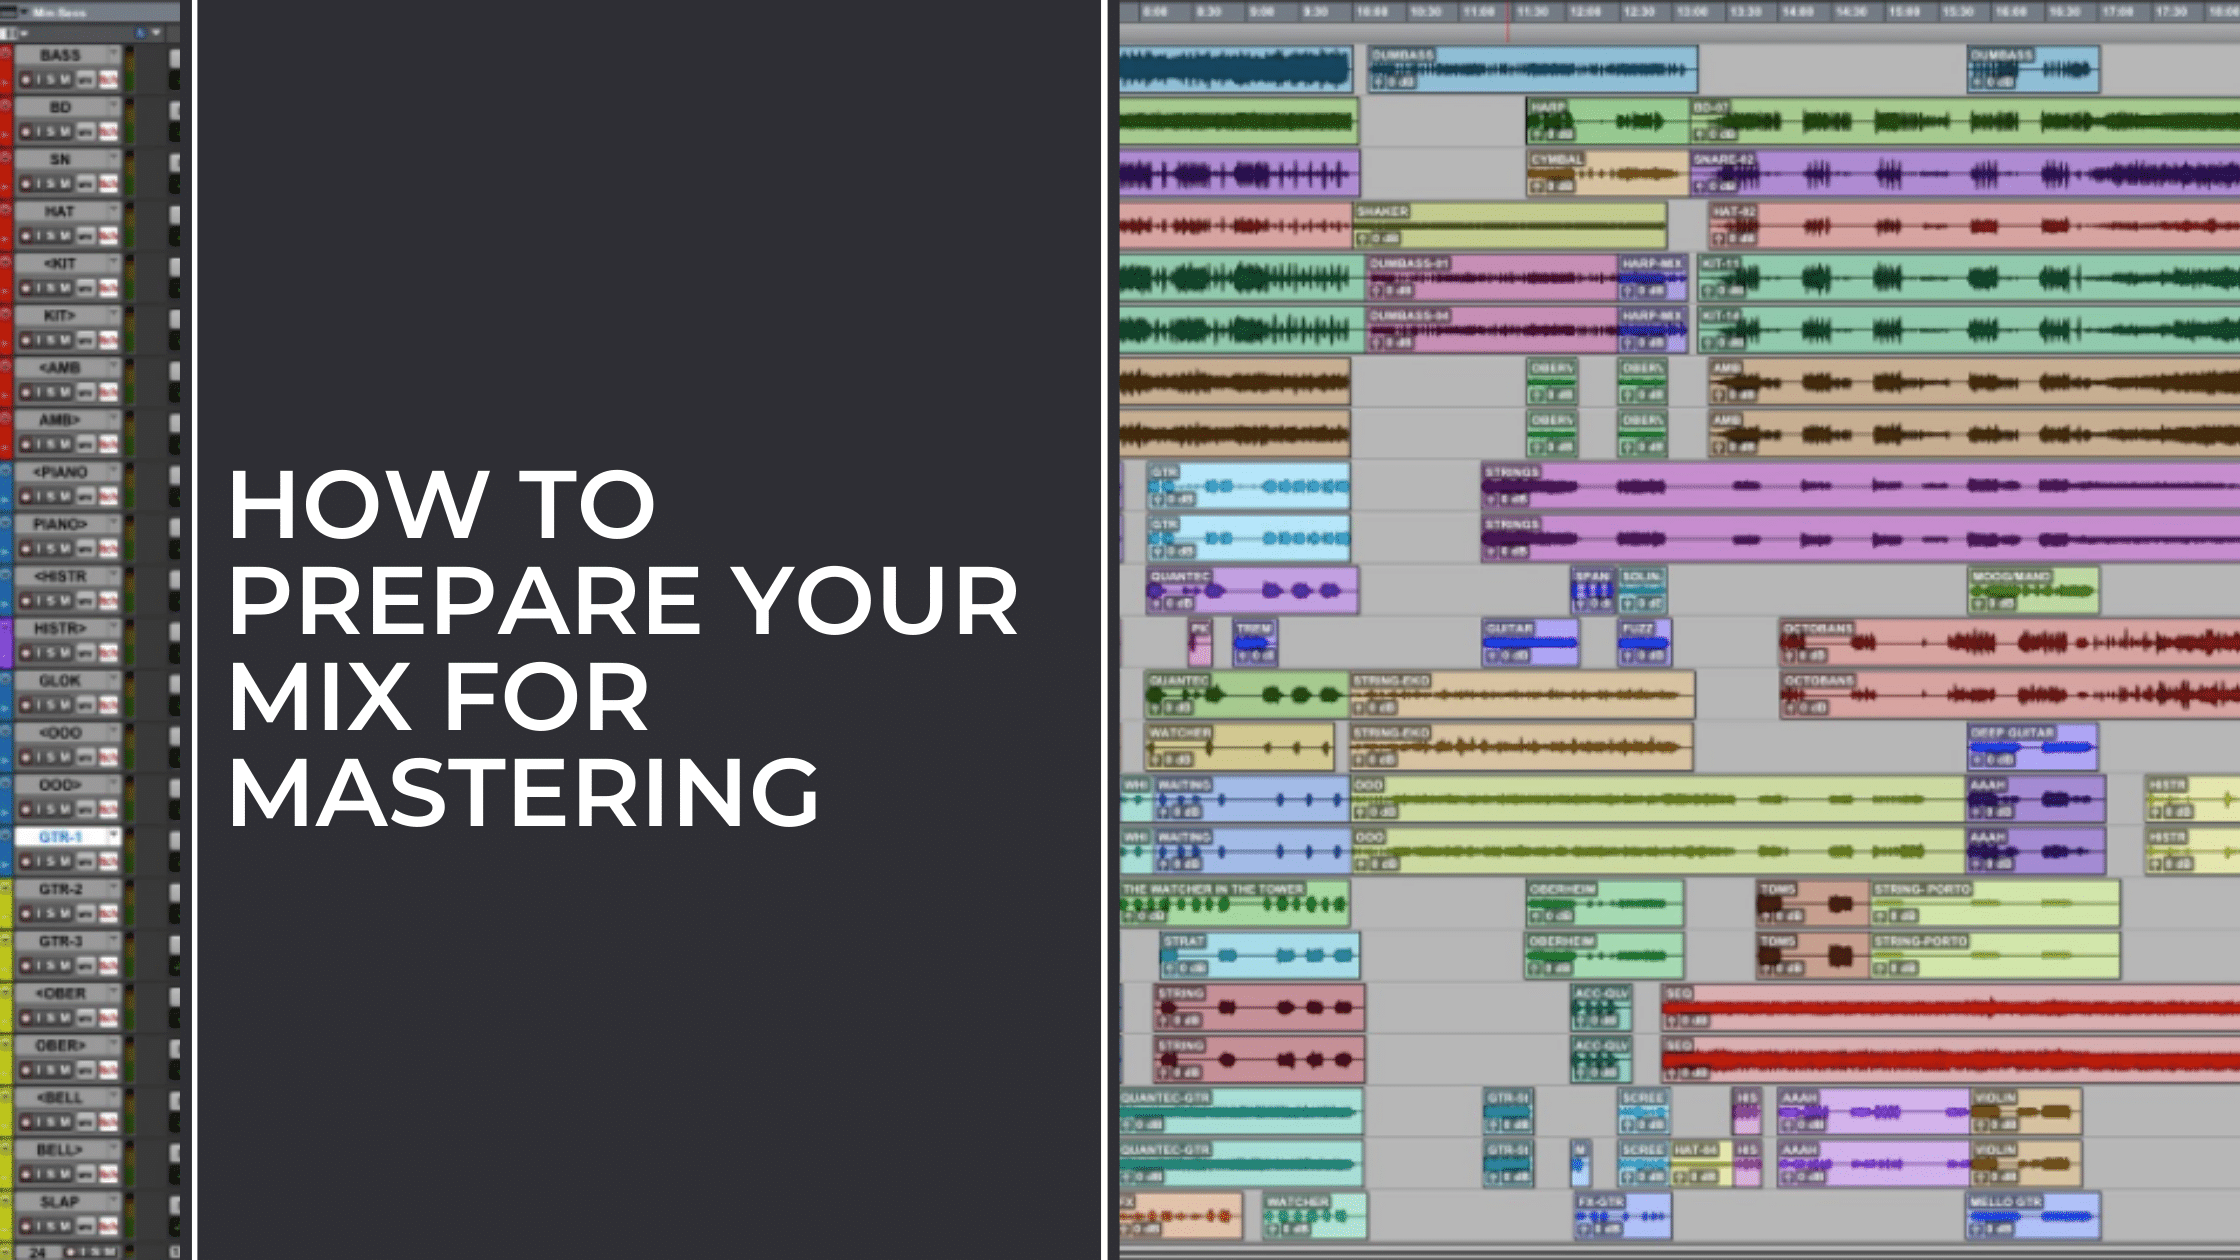 How to prepare your mix for mastering